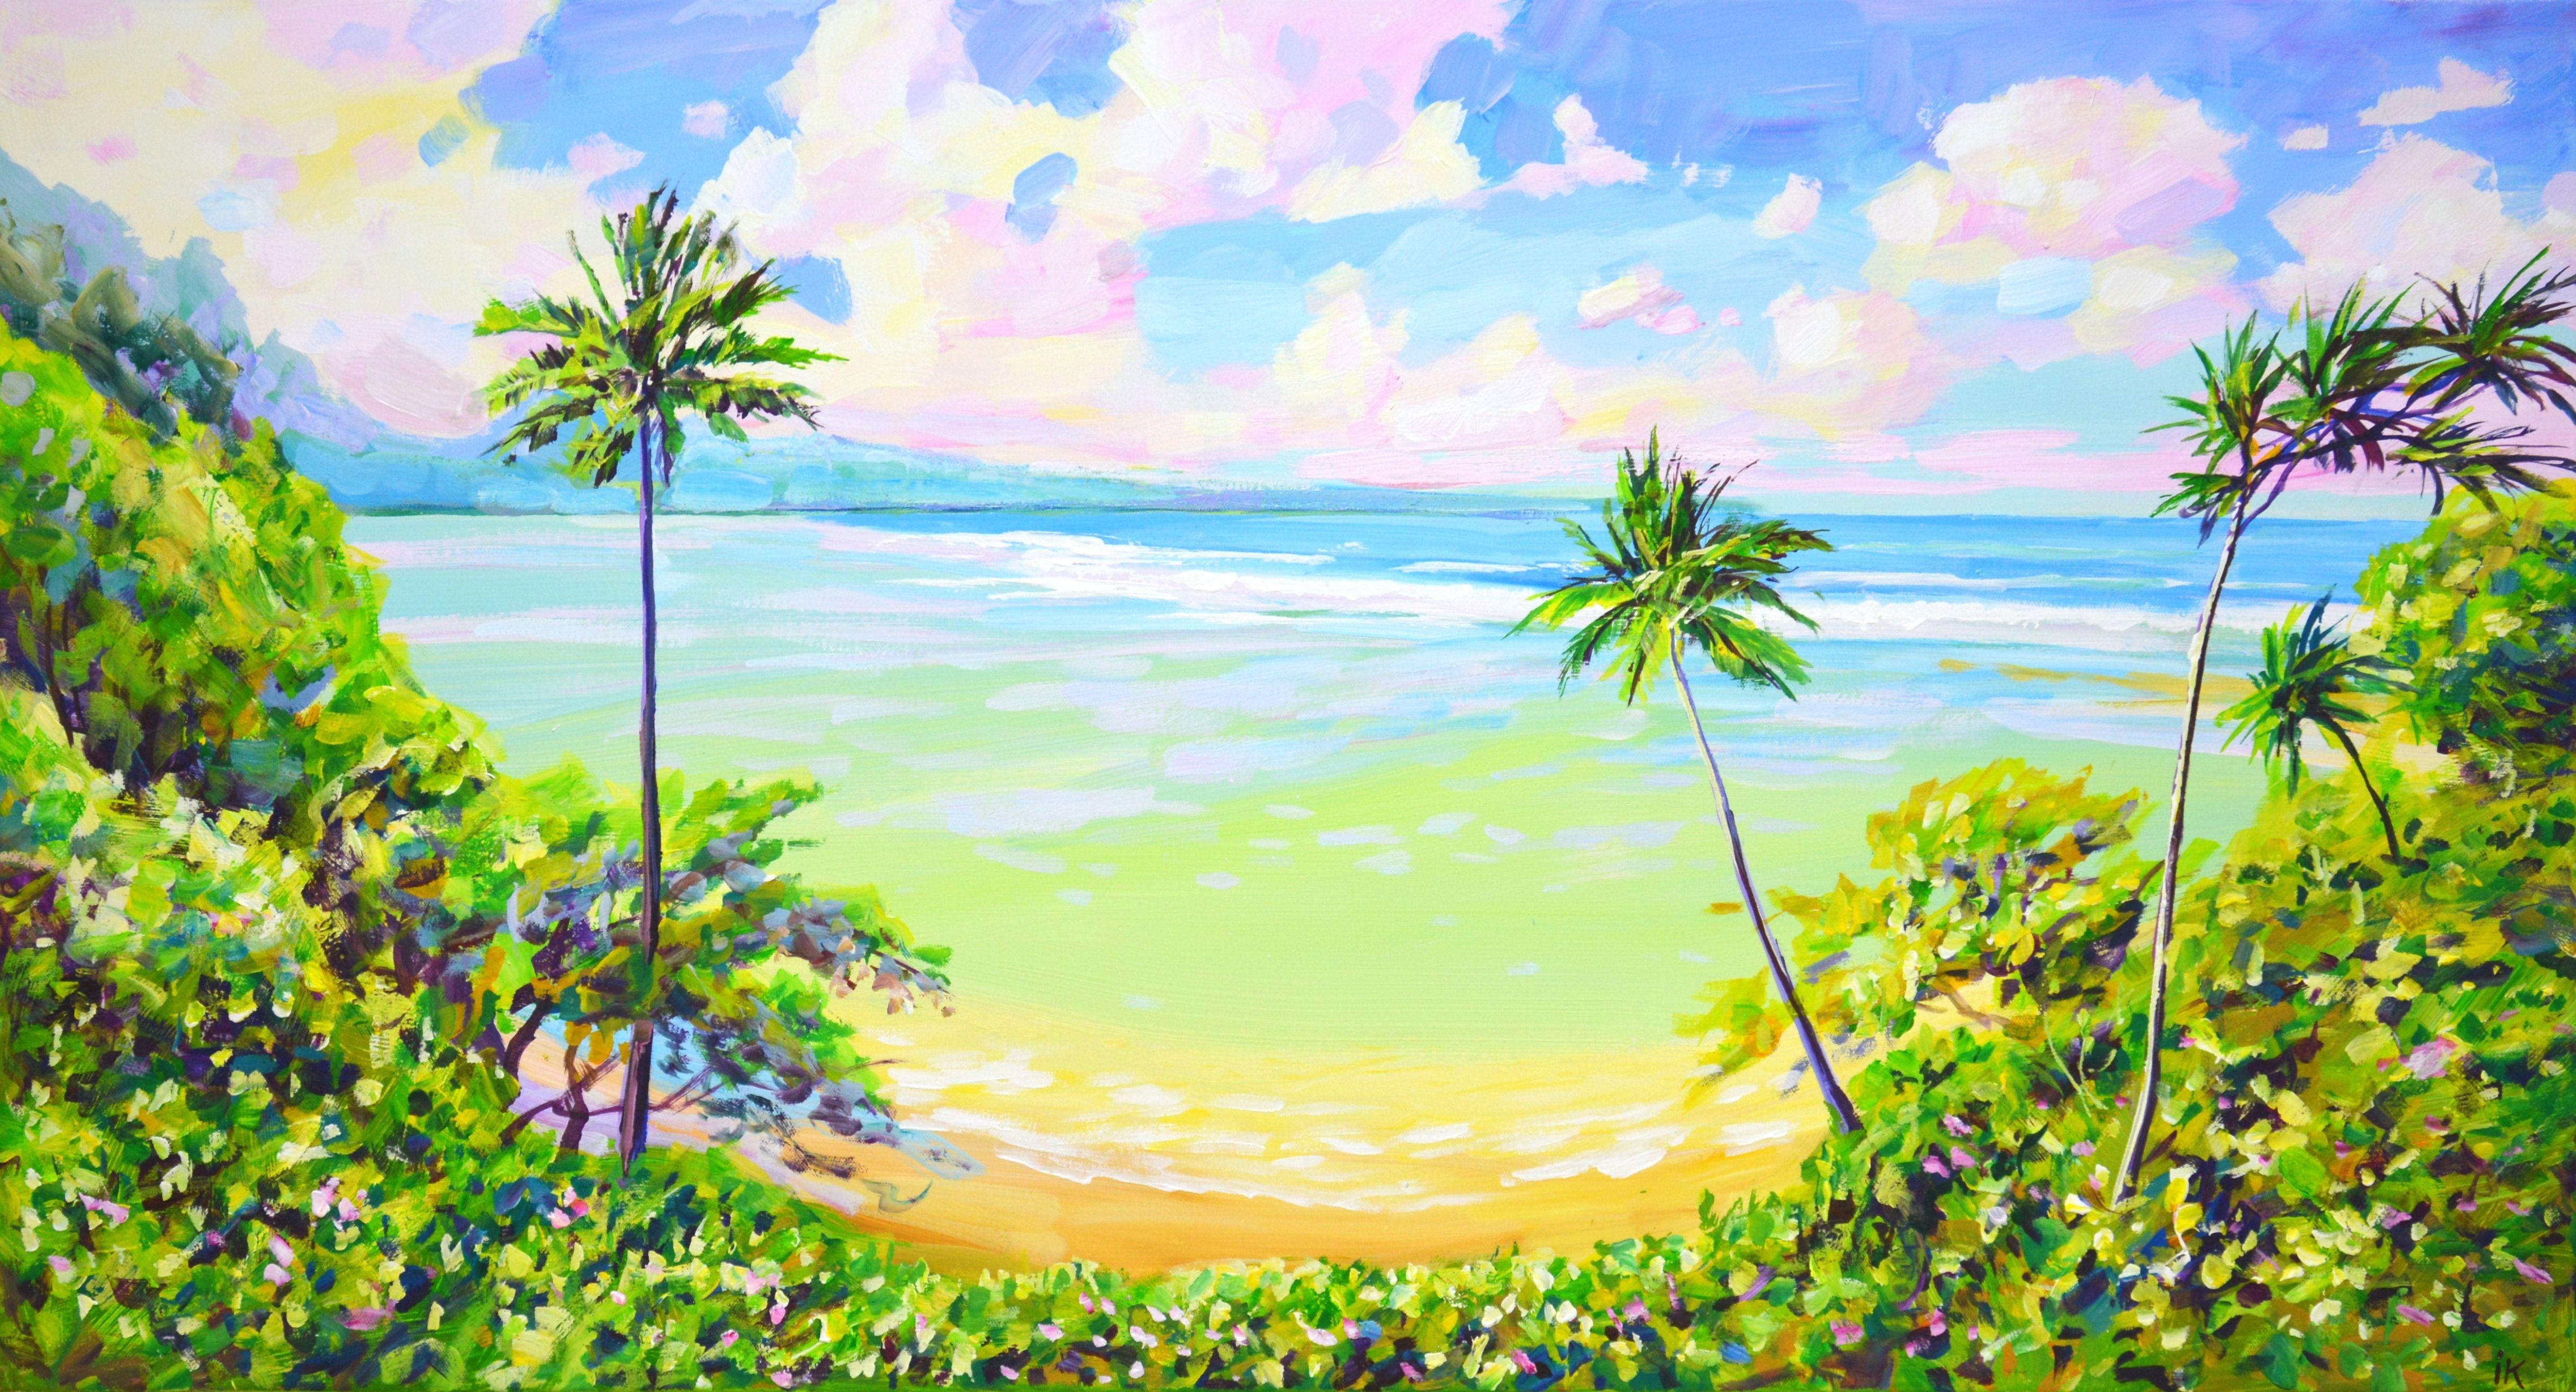 Sunny beach, ocean, beach, palm trees, sky with clouds, sand, atmosphere of relaxation, romance. A rich palette of blues, greens, yellows, pinks and whites enhances the energy of the ocean. Impressionism. The shining of the ocean and the amazing sky